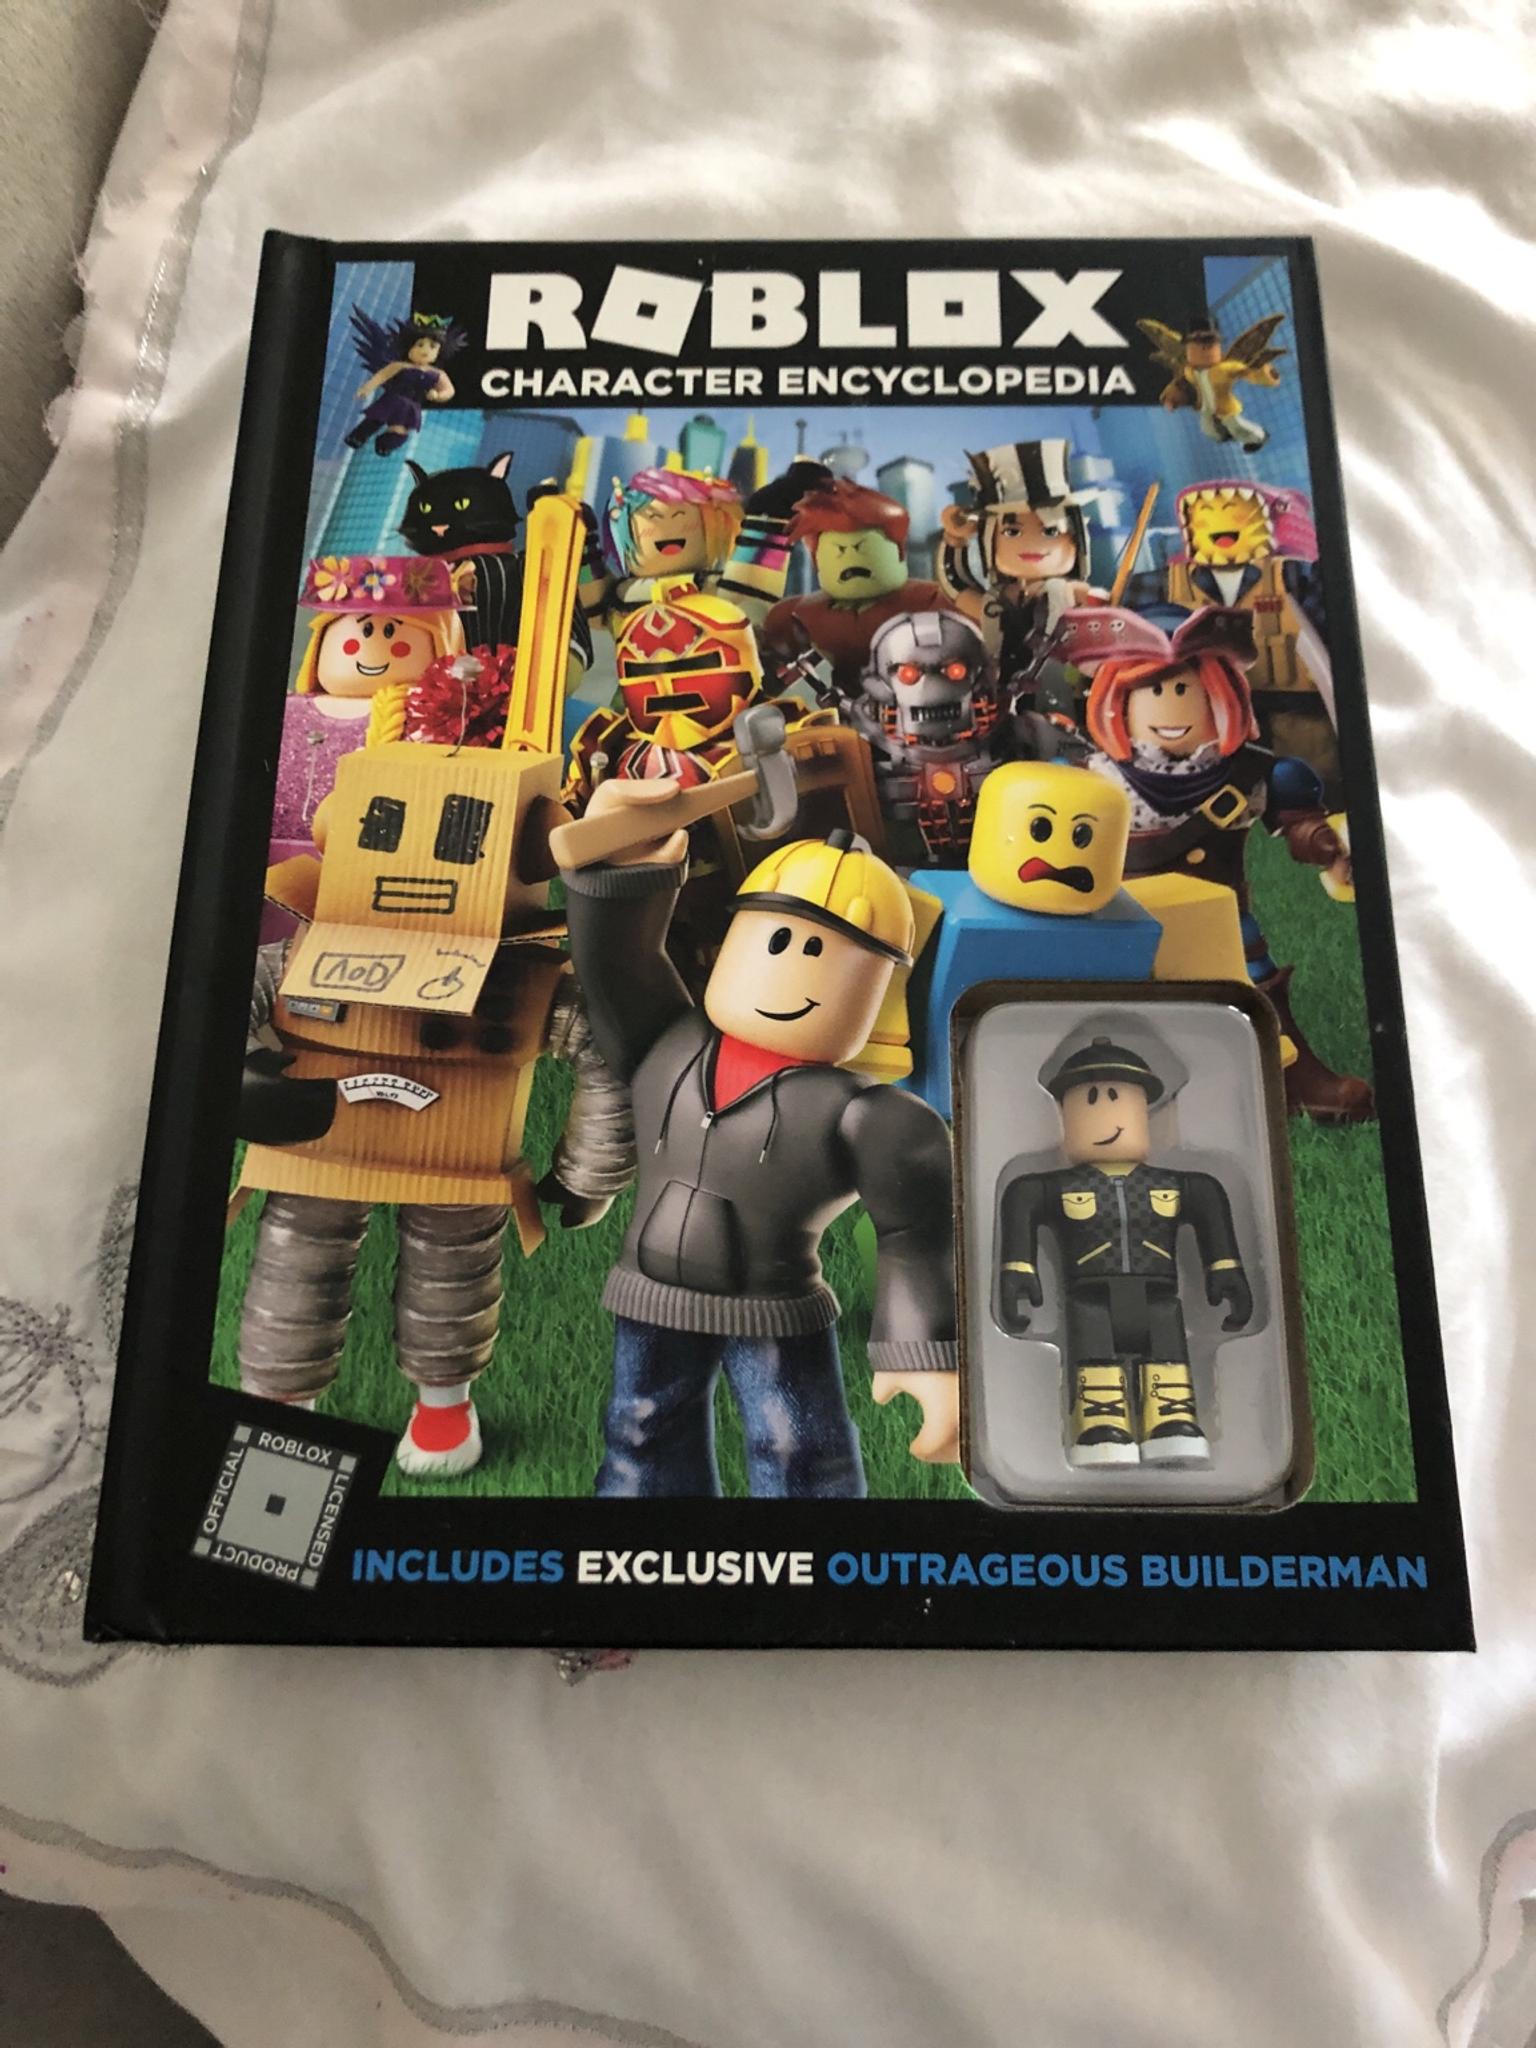 Roblox Character Encyclopaedia In Wf16 Kirklees For 10 00 For